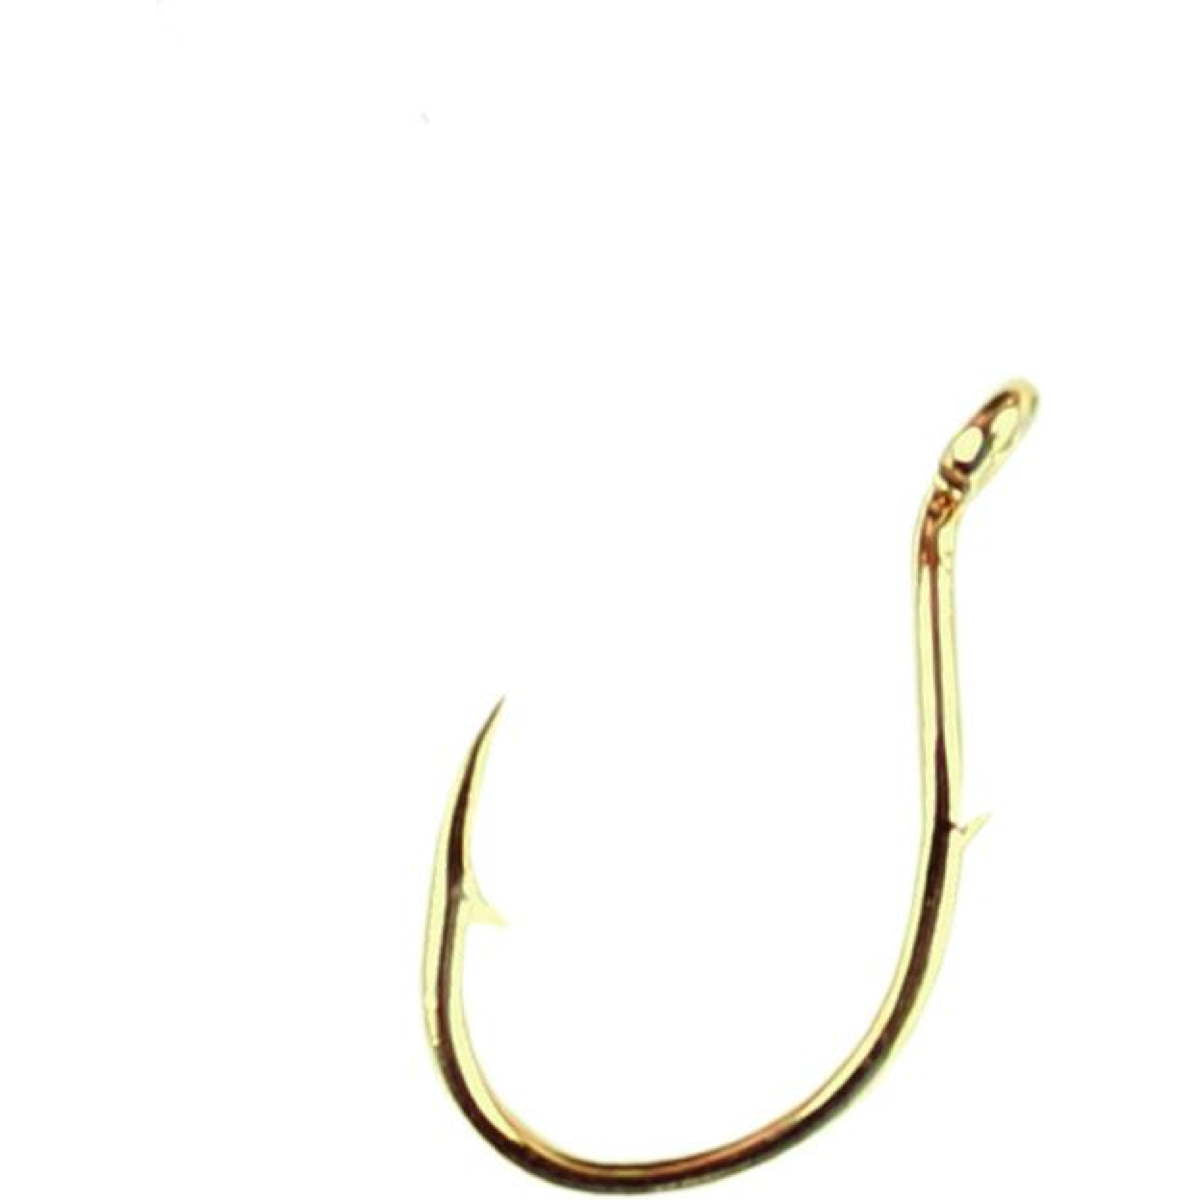 Photo of Eagle Claw Classic Salmon Egg Baitholder Hook for sale at United Tackle Shops.